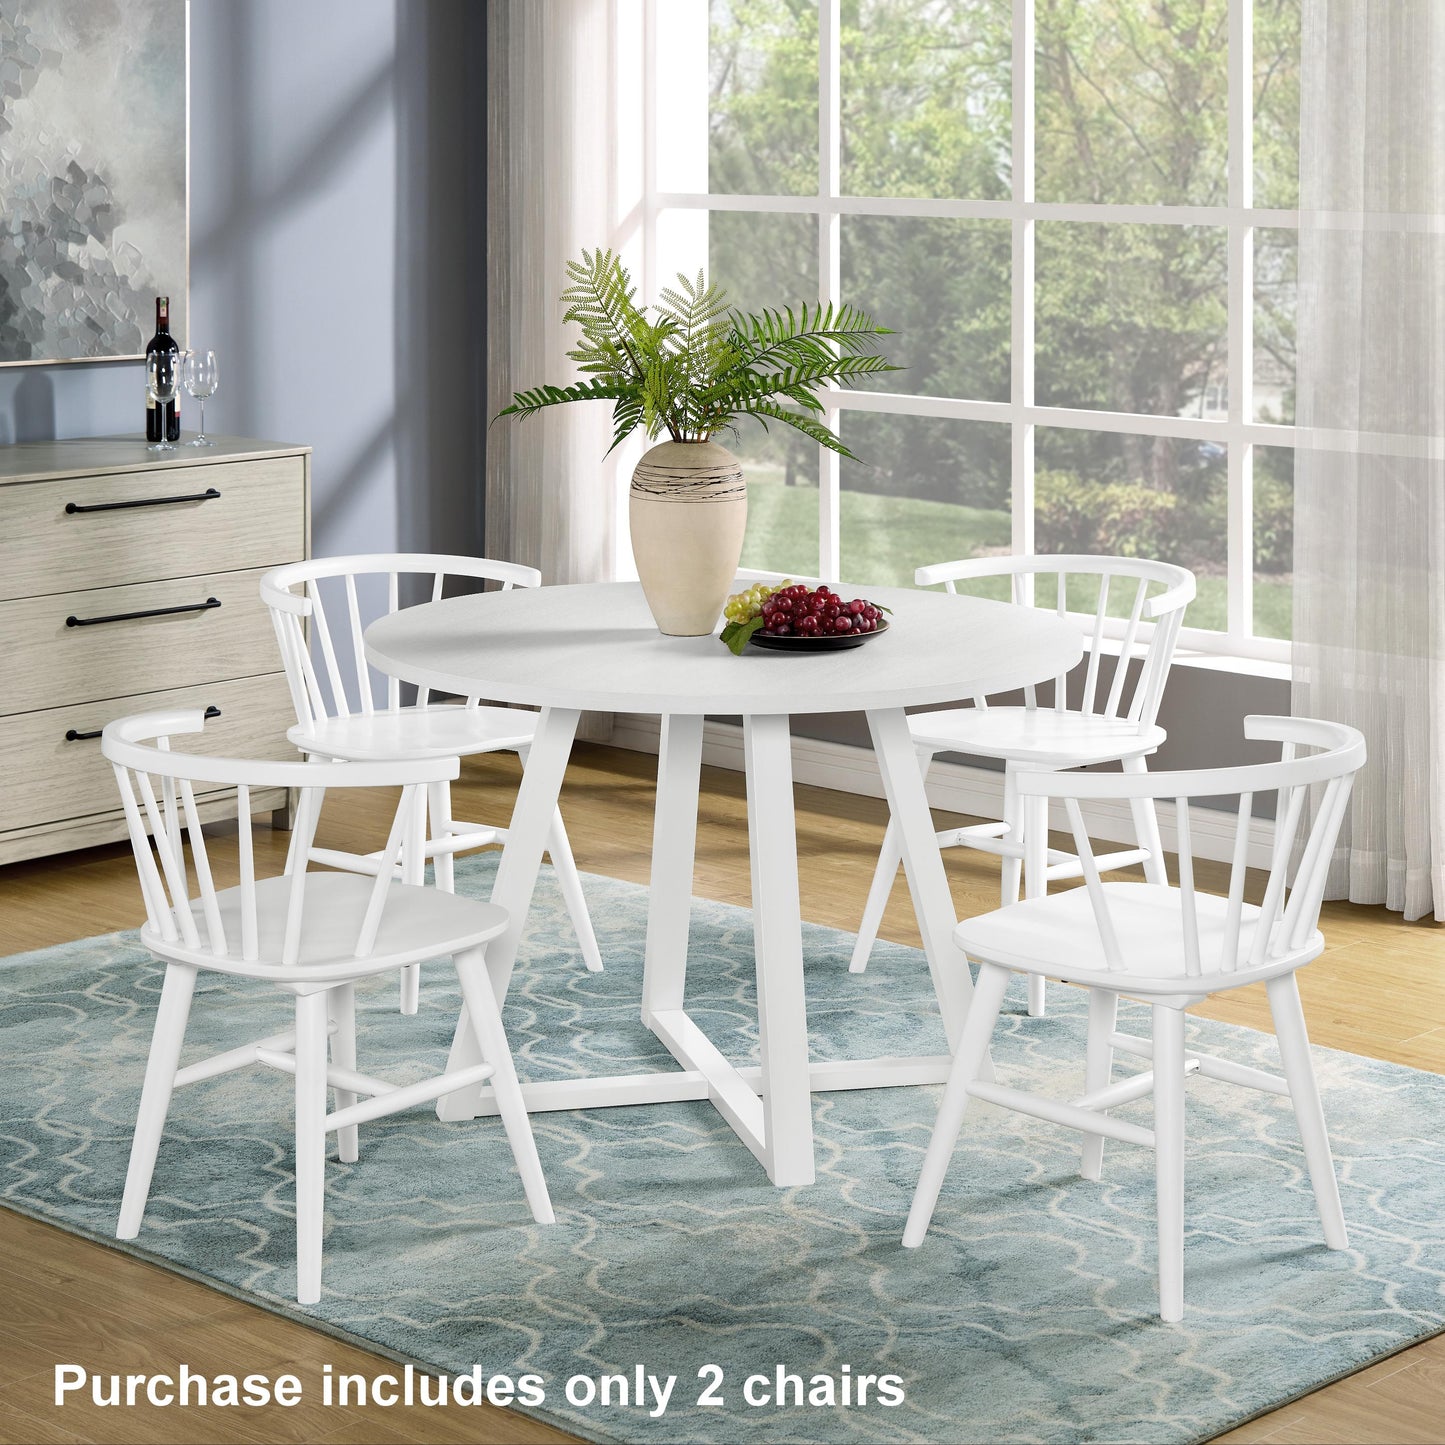 Alwynn Contemporary Wooden Spindle Back Dining Chairs, Set of 2, White